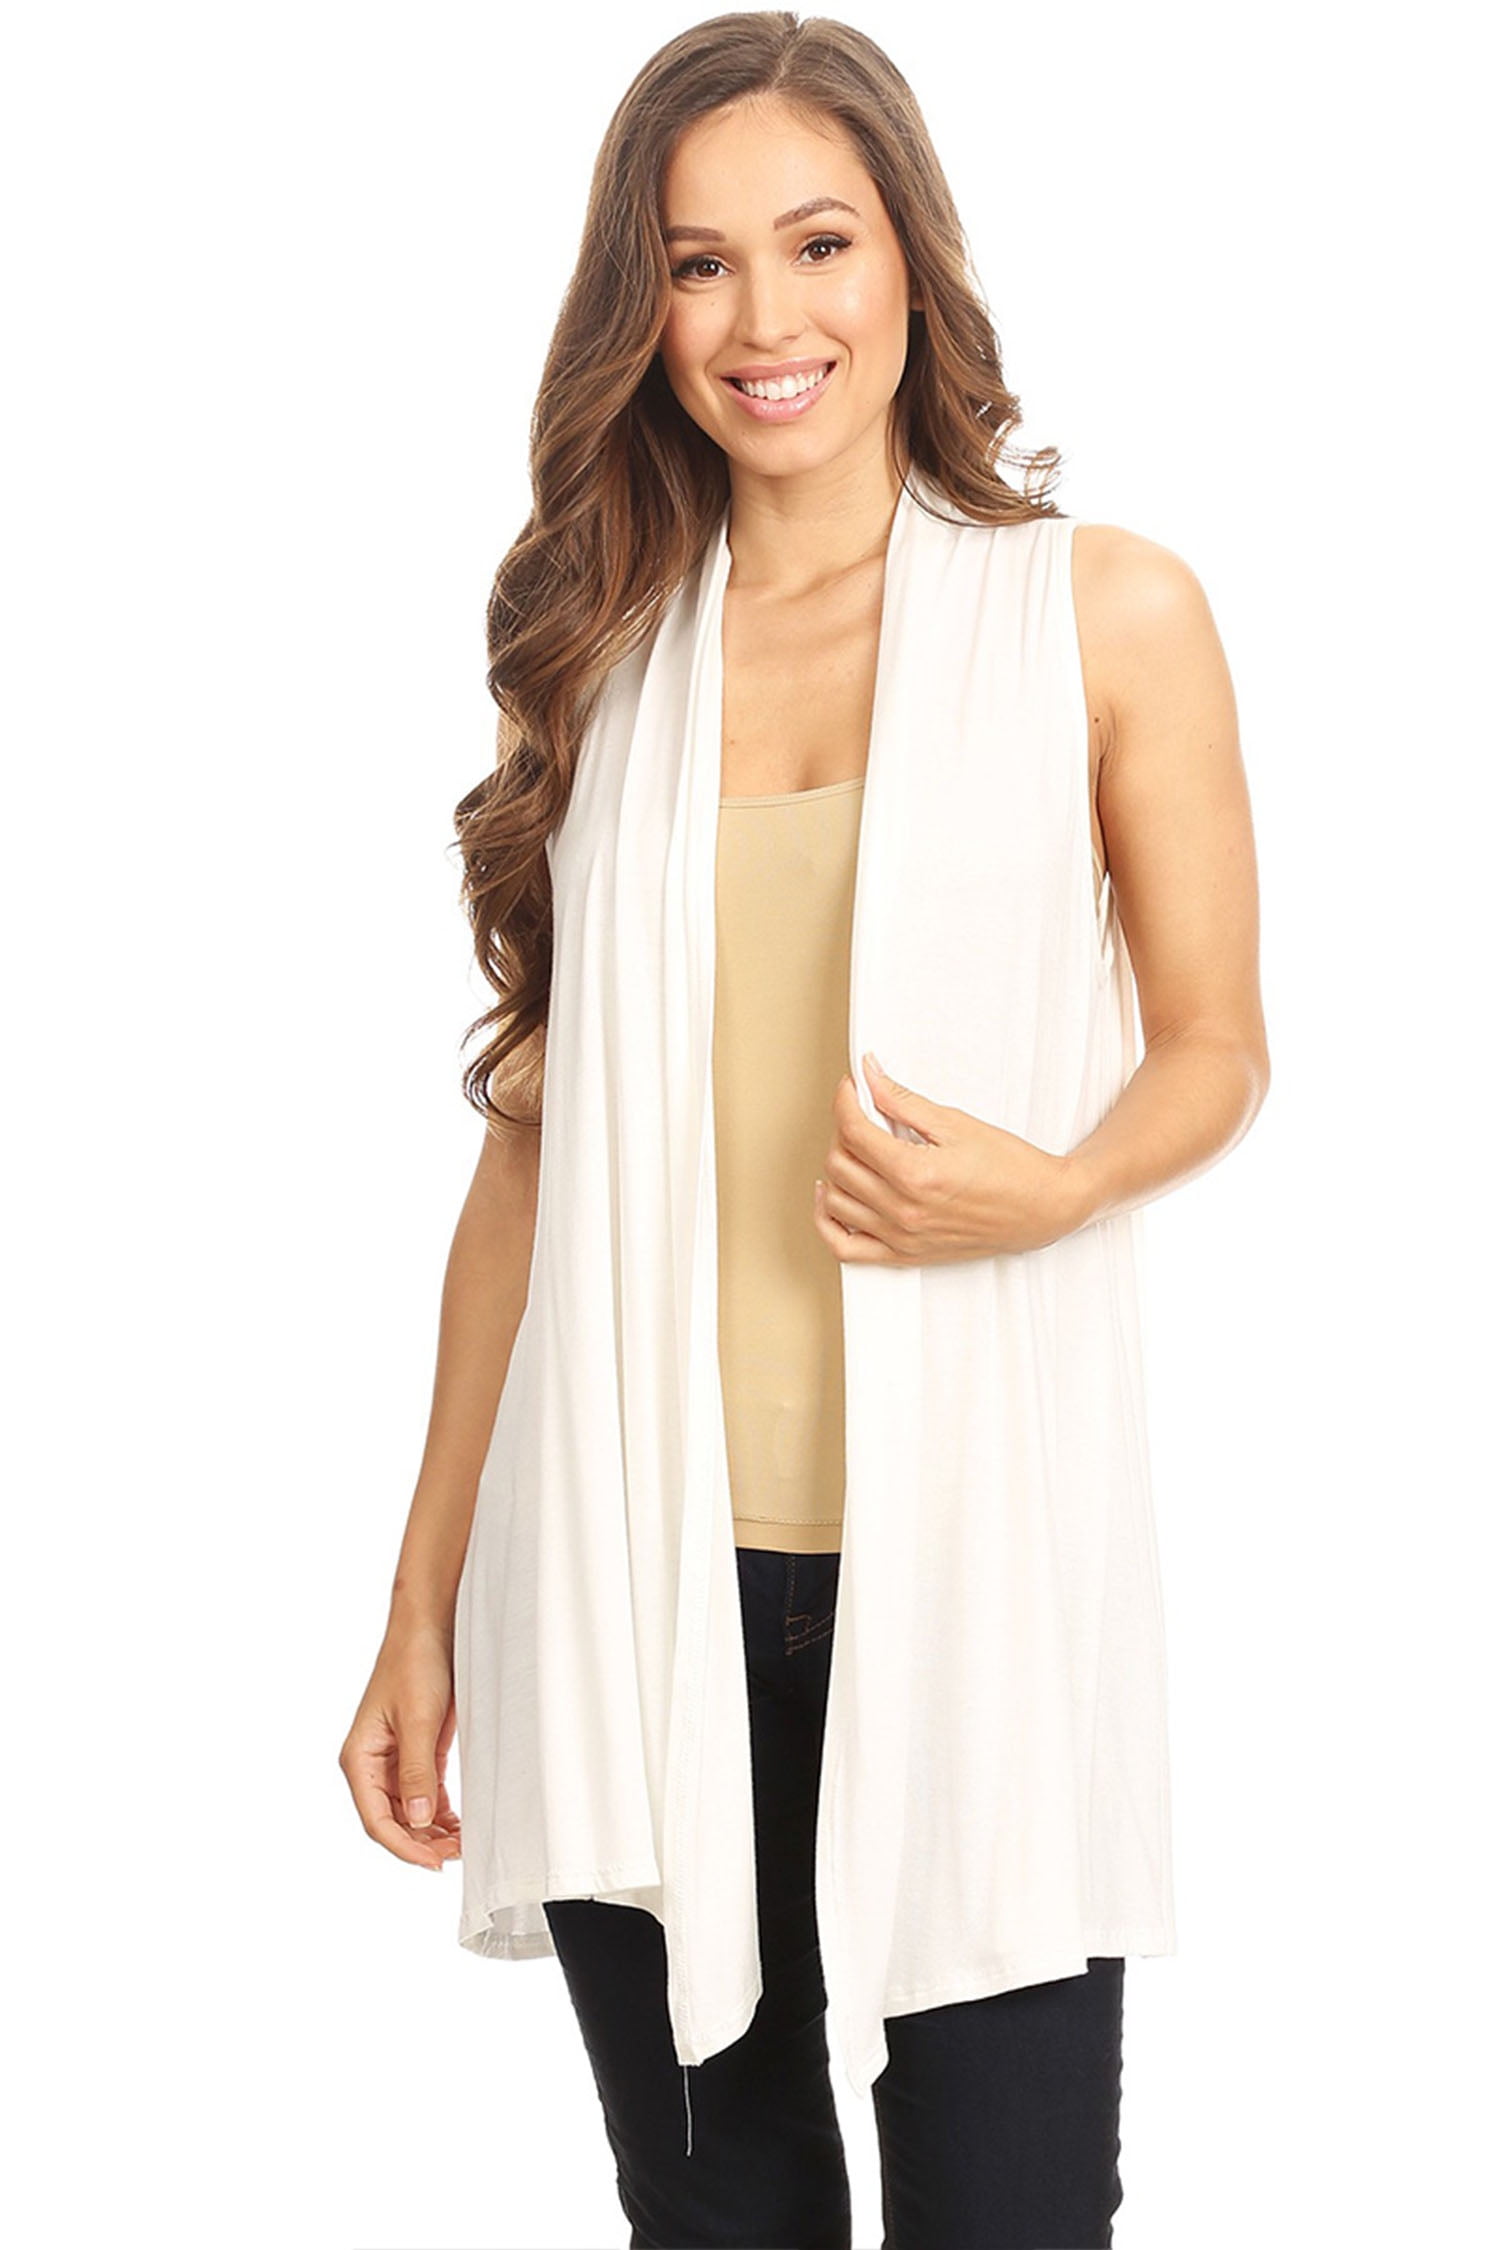 Women's Sleeveless Draped Open Front Cardigan Vest Made in USA ...